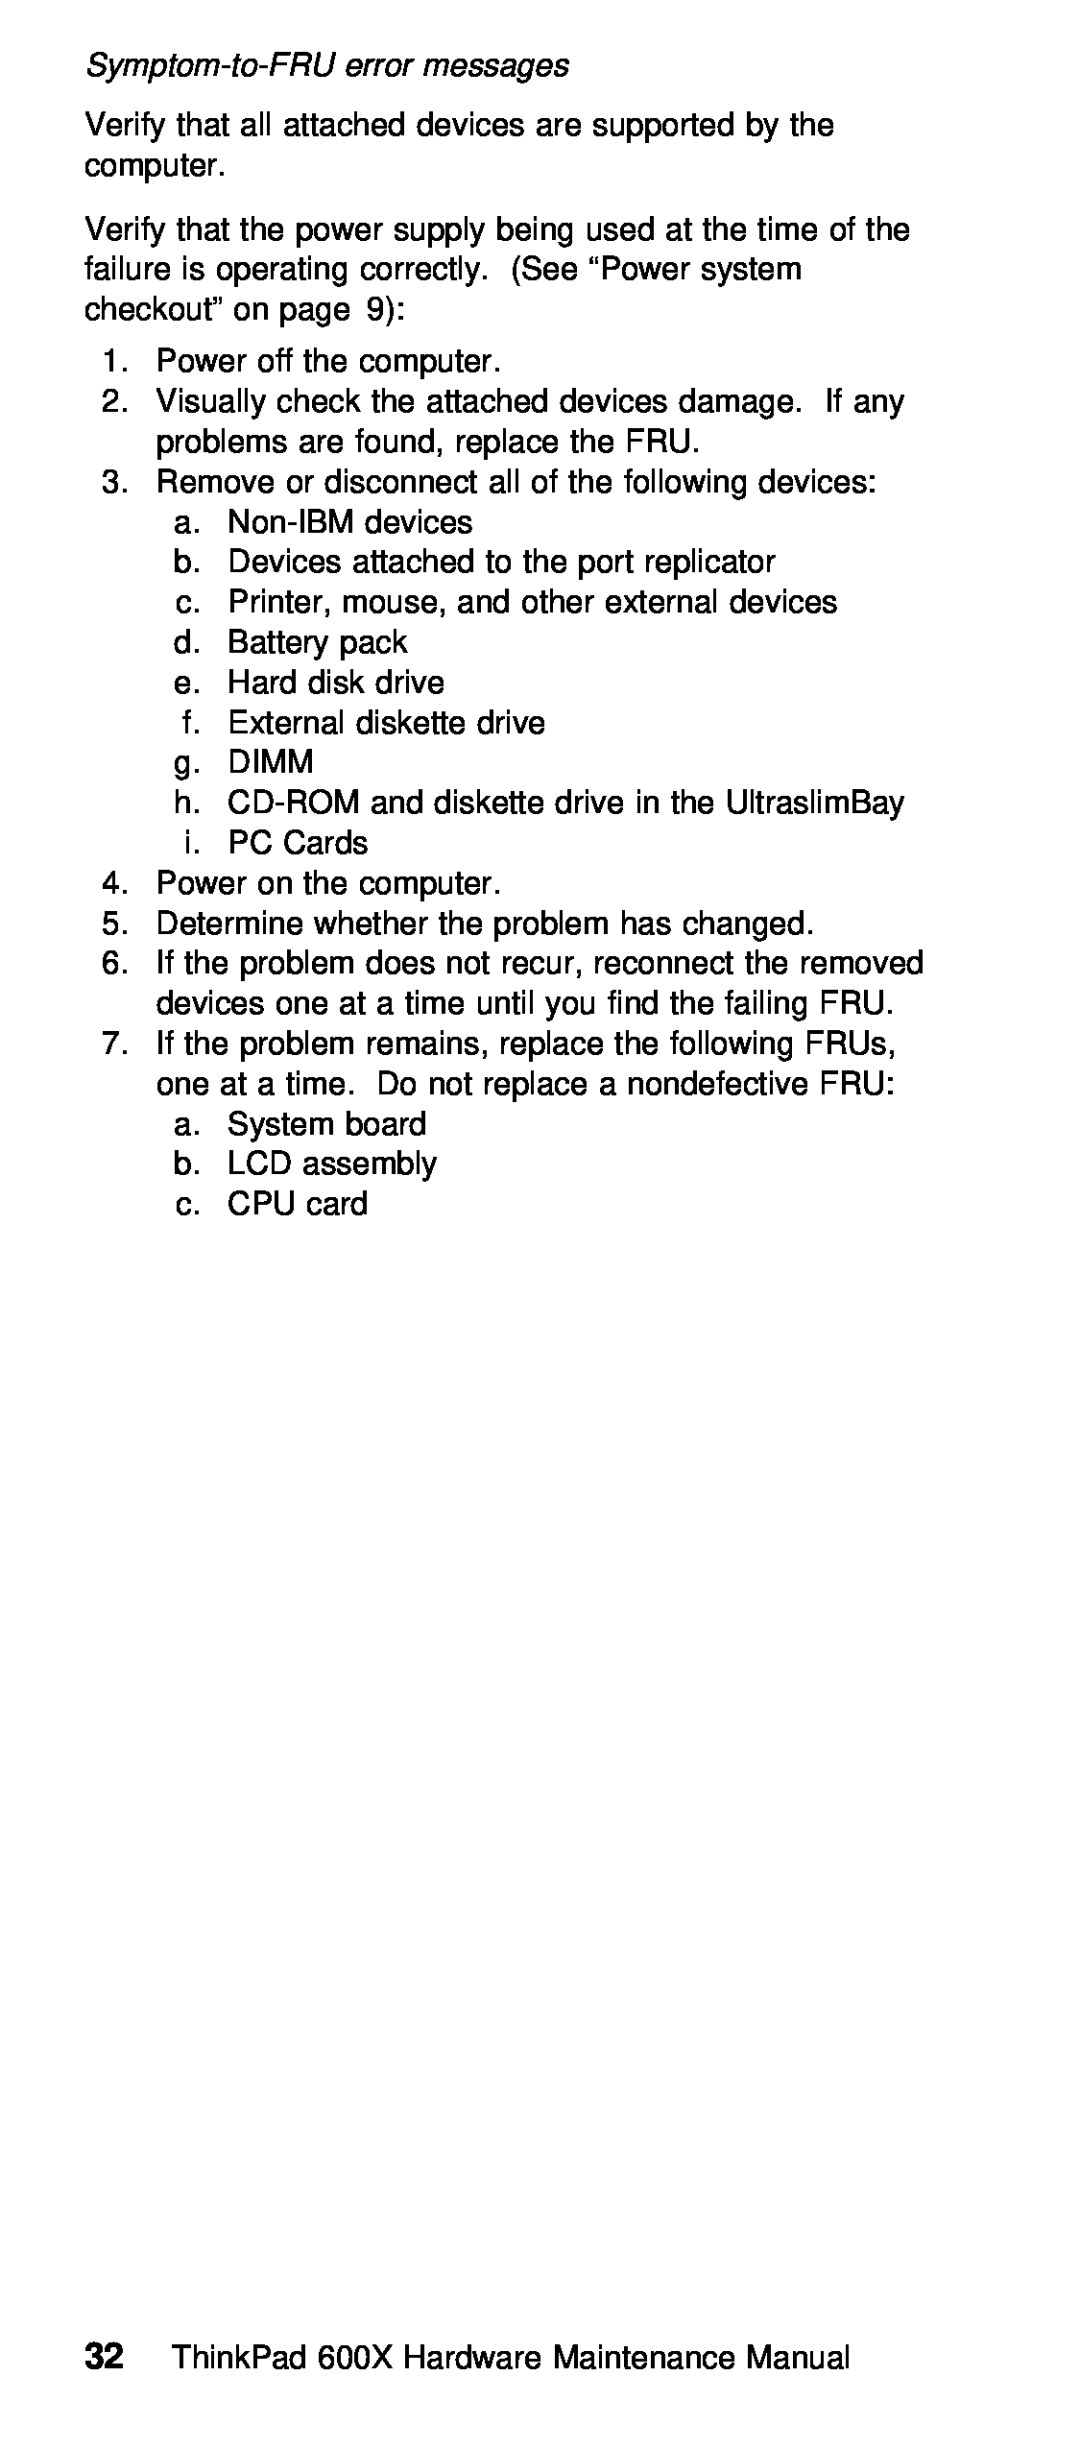 IBM 600X (MT 2646) manual Verify that all attached devices are supported computer 